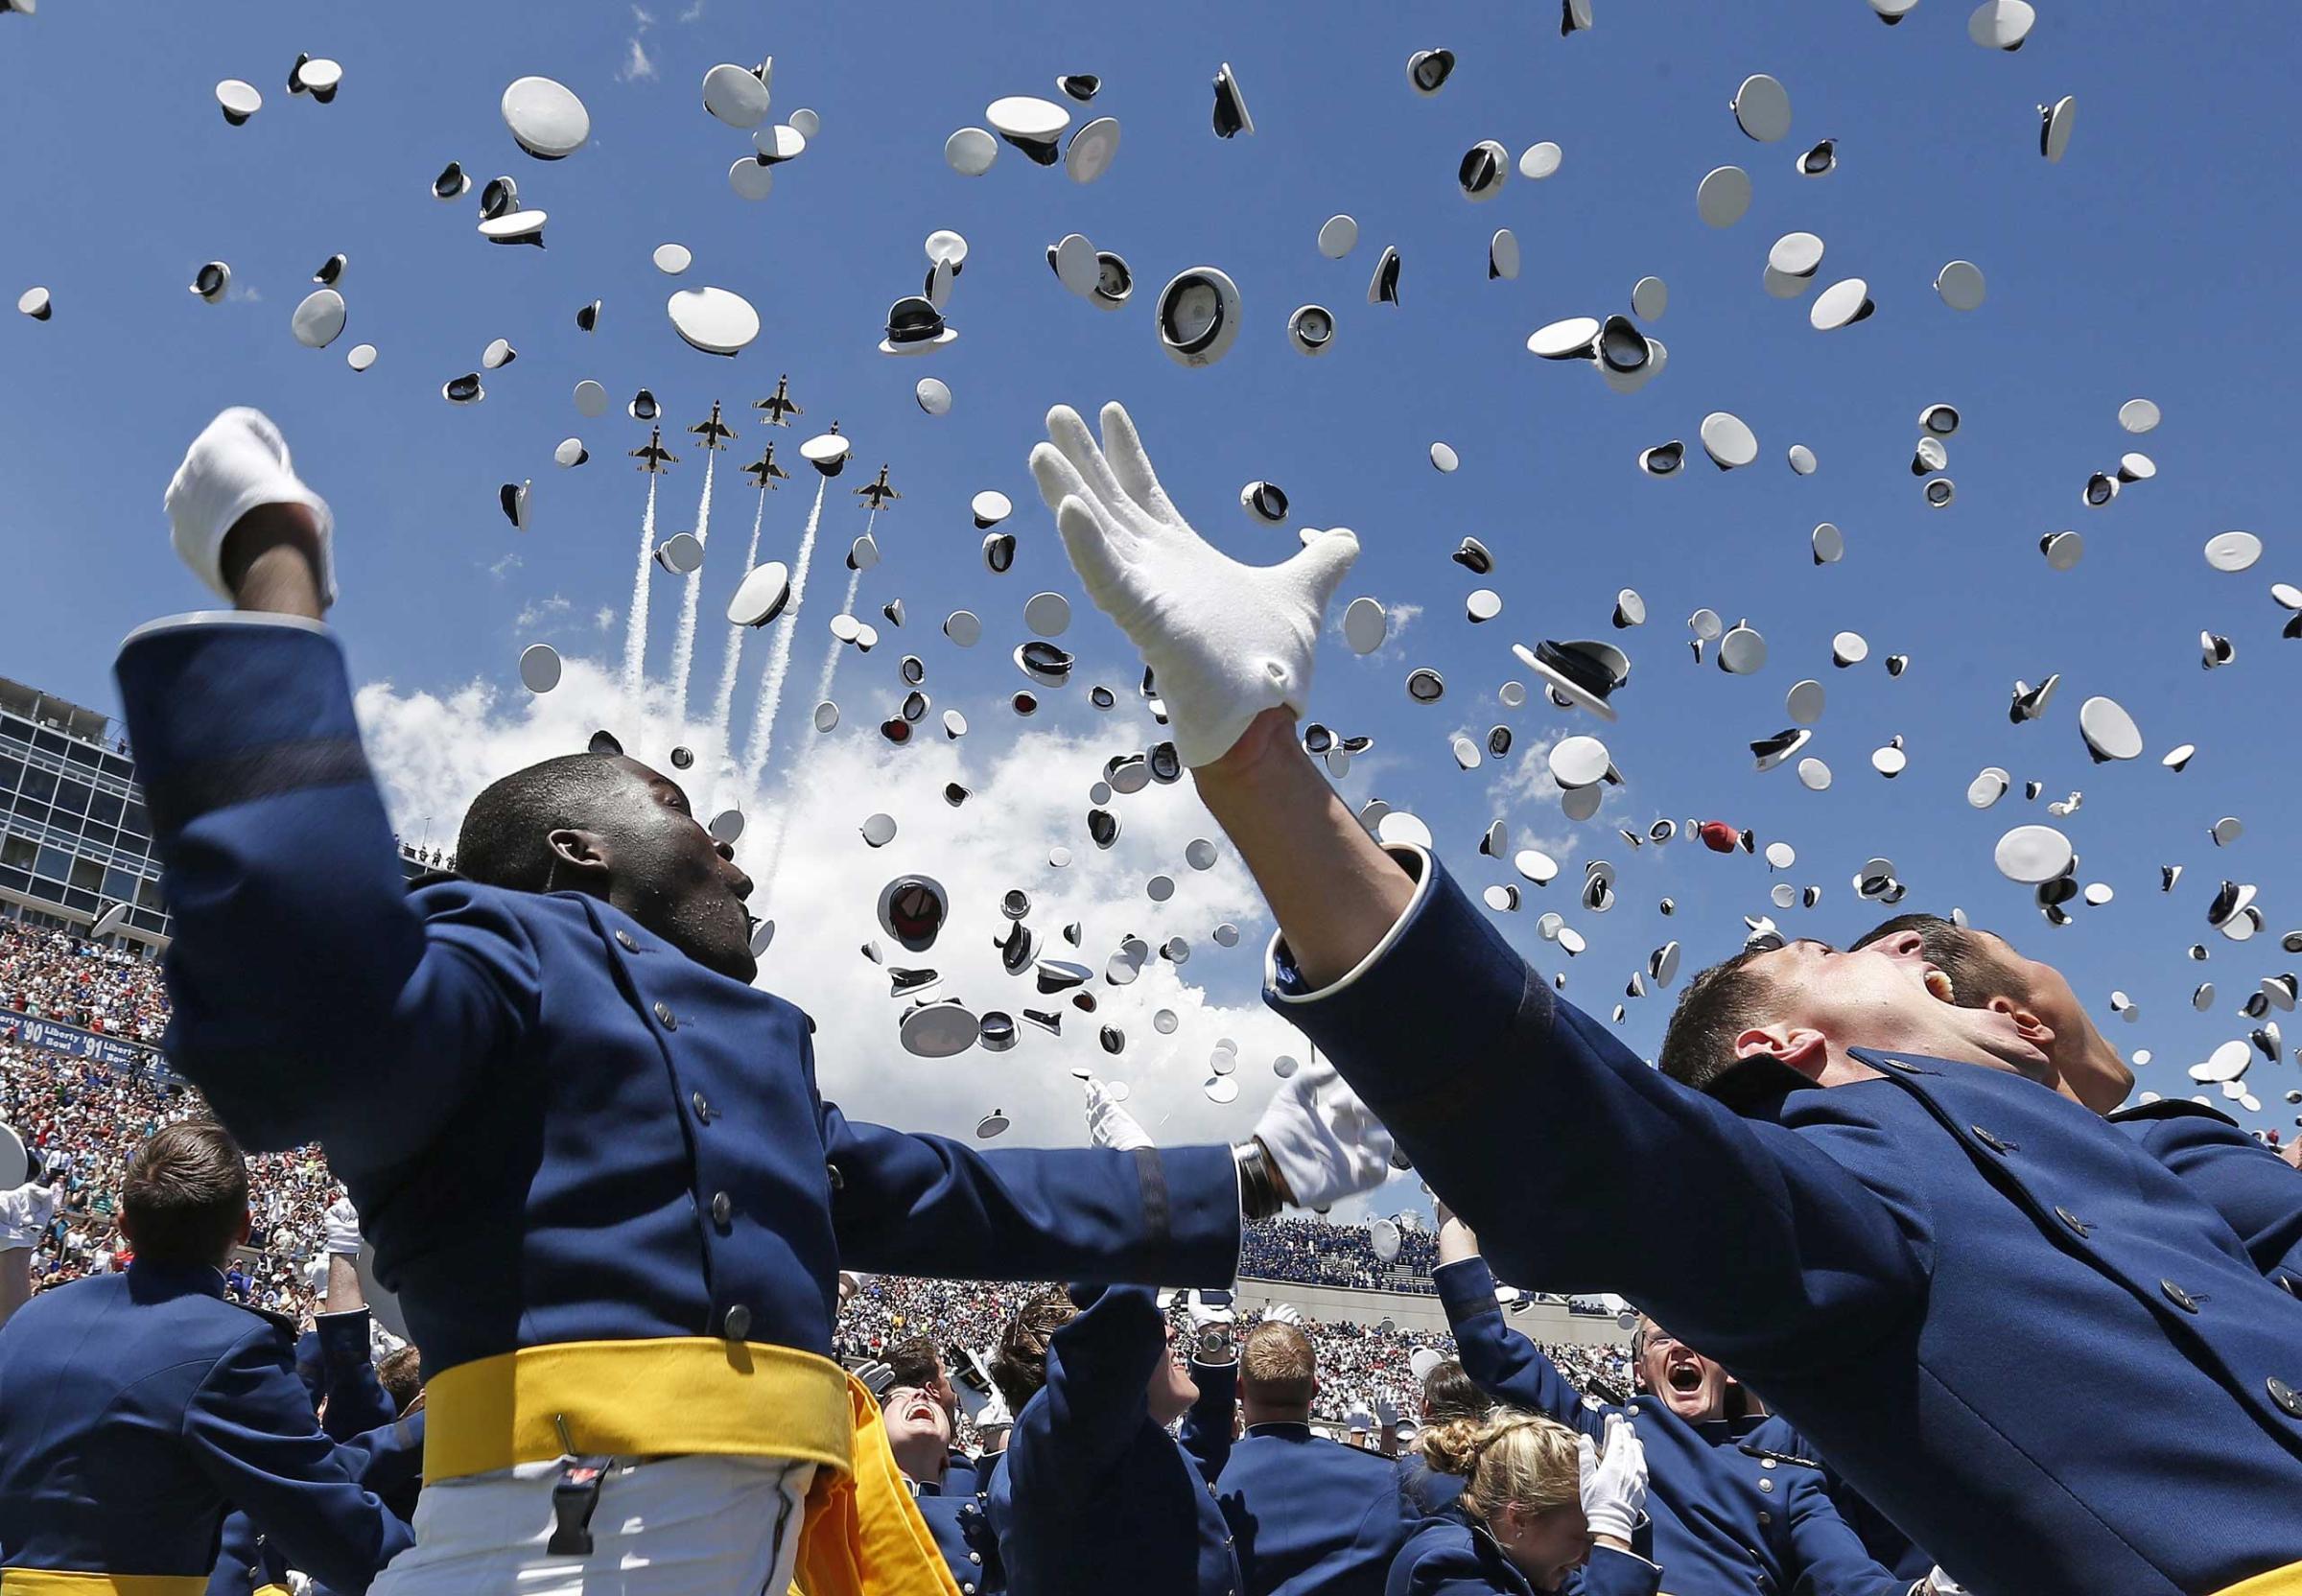 Air Force Academy graduates throw their caps into the air at the completion of the graduation ceremony for the class of 2014, at the U.S. Air Force Academy, Colo., May 28, 2014.